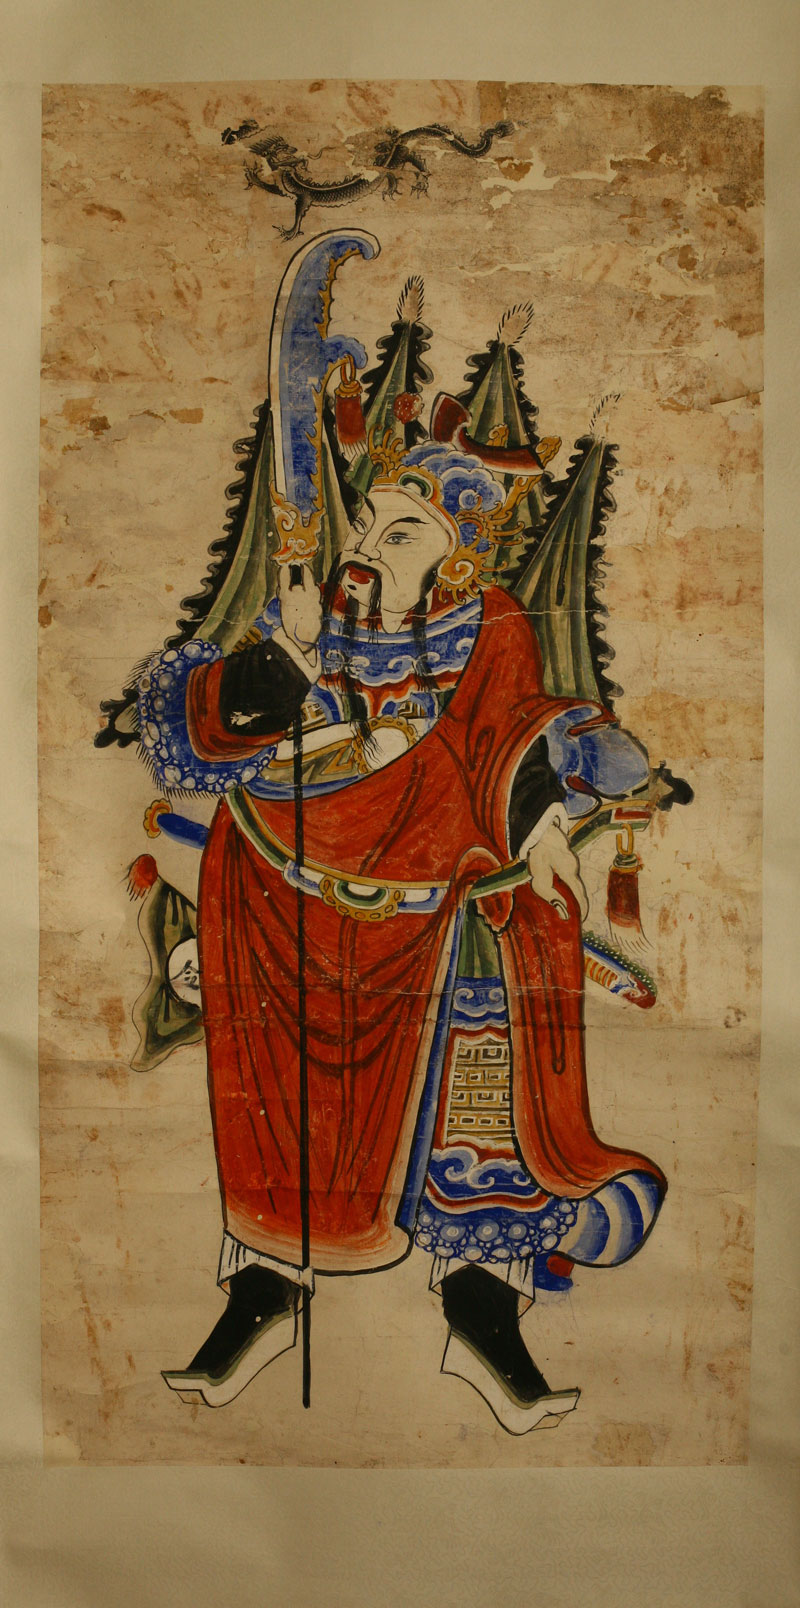 Painting of a legendary god, China, 19th century.